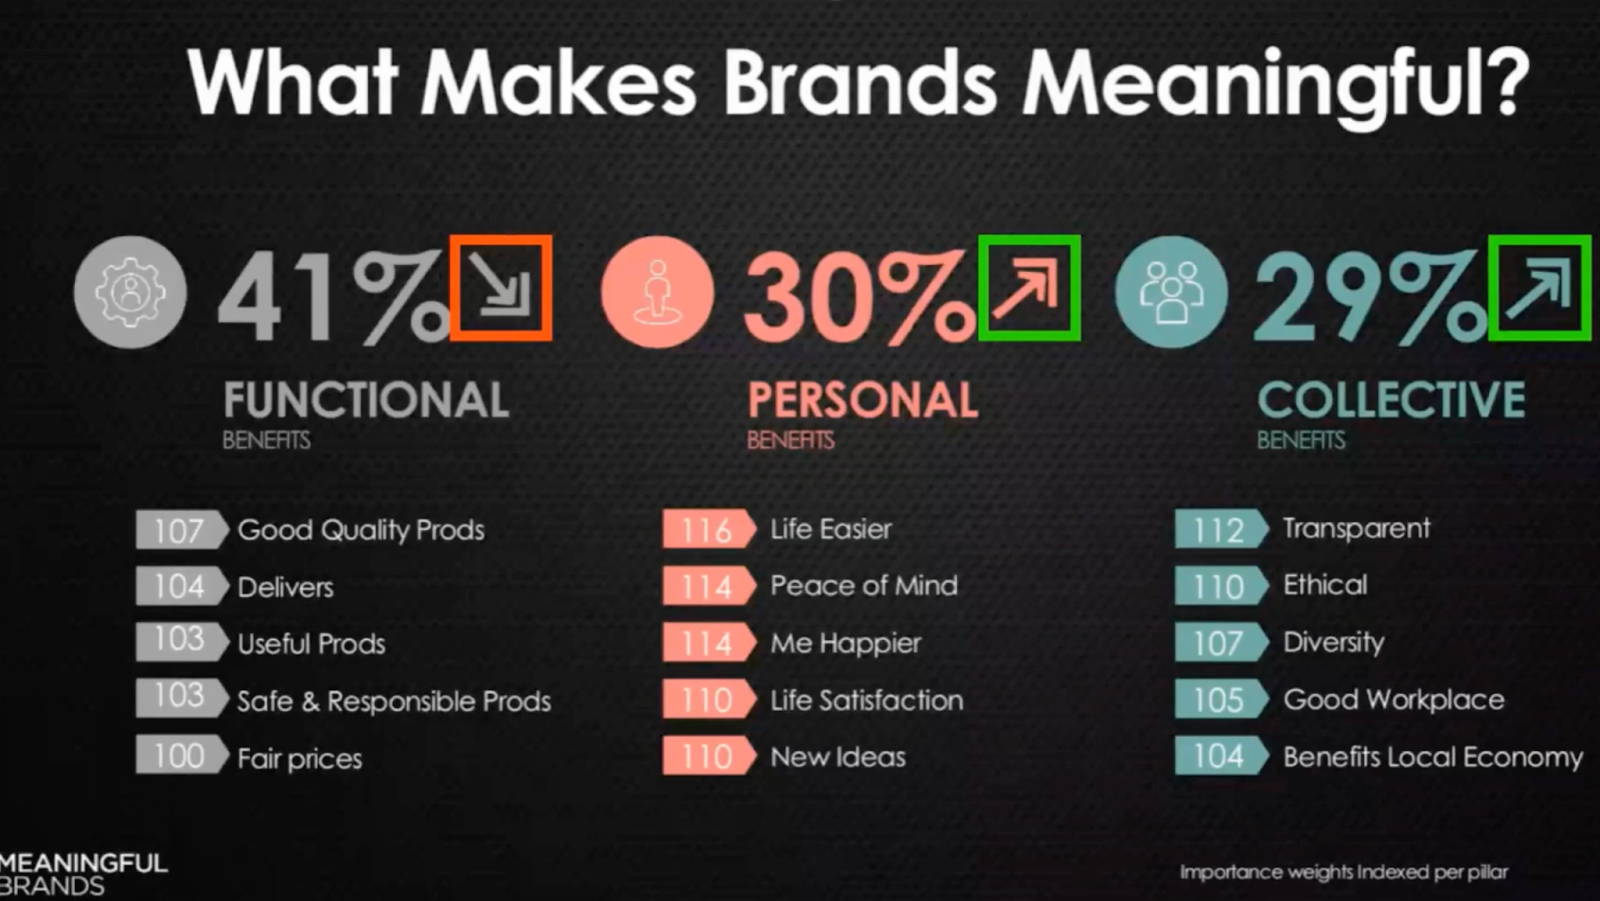 What makes brands meaningful?